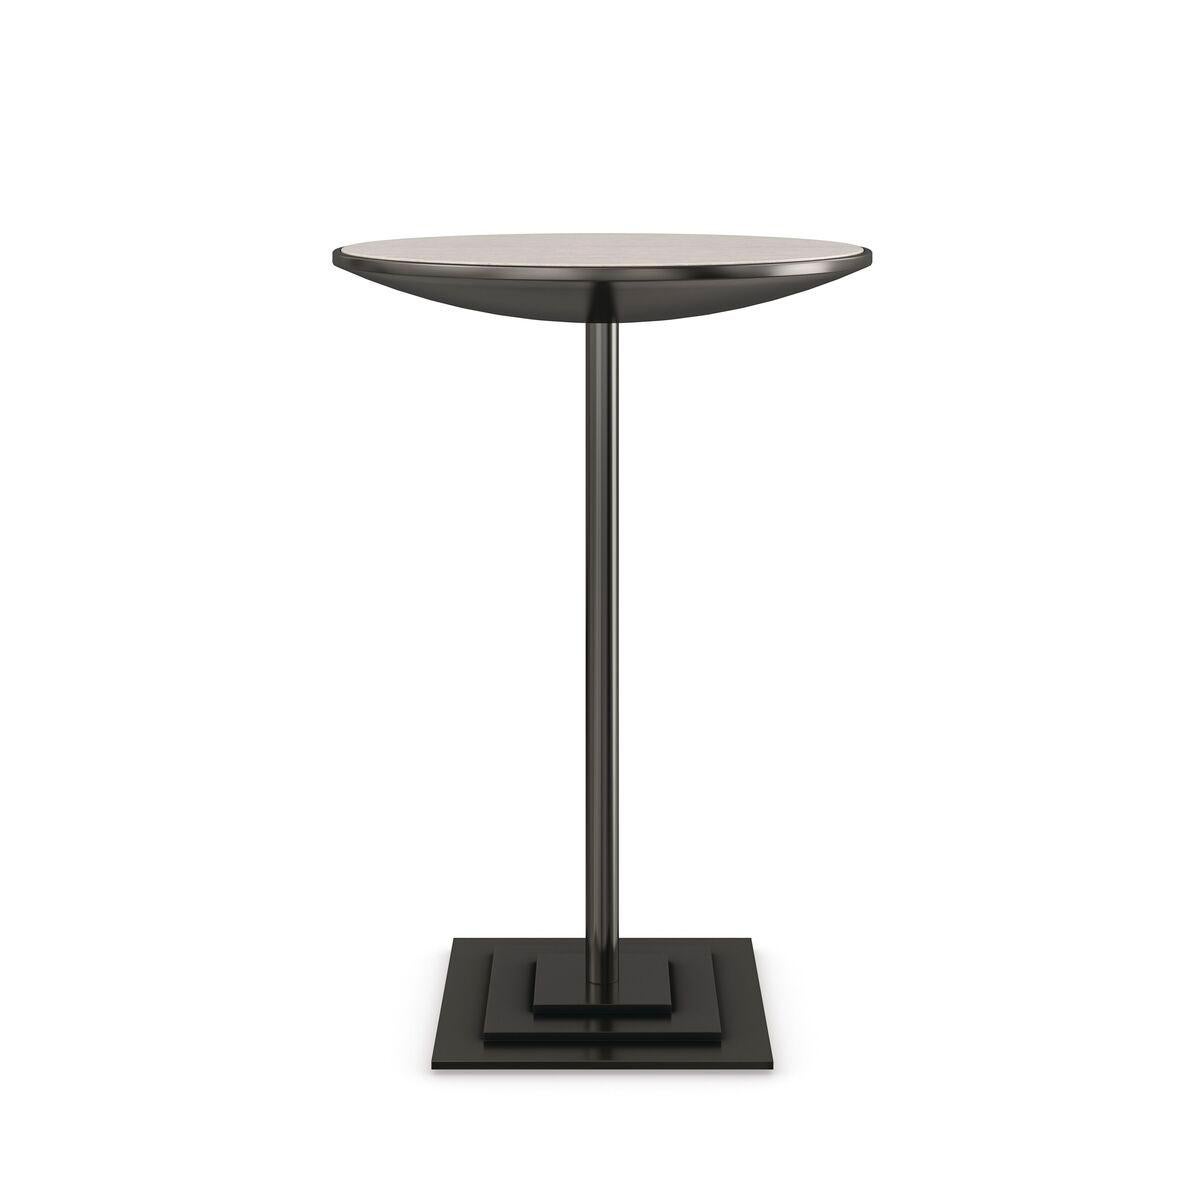 Vietnamese Onig Minimalist Accent Table For Sale